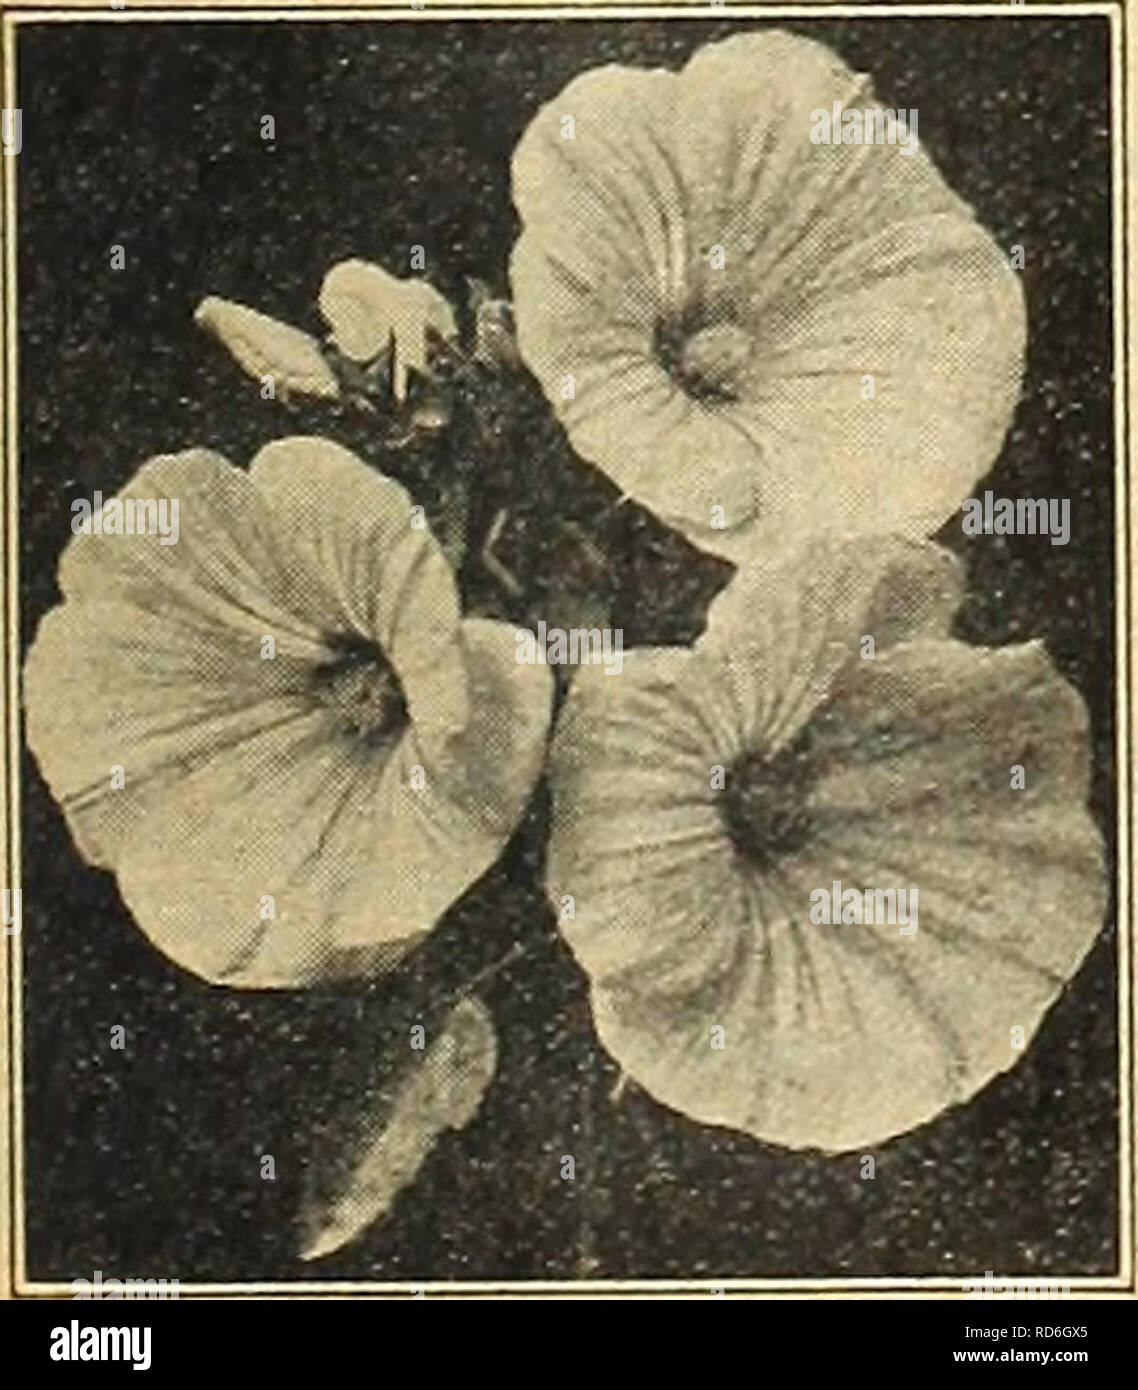 . Currie's farm and garden annual : spring 1921 46th year. Flowers Seeds Catalogs; Bulbs (Plants) Seeds Catalogs; Vegetables Seeds Catalogs; Nurseries (Horticulture) Catalogs; Plants, Ornamental Catalogs; Gardening Equipment and supplies Catalogs. Maurandia.. 5 10 Lavatera Splendens. MIGNONETTE—Continued. Pkt Machet—A variety of dwarf, vigorous growth, with dark green foliage and deliciously fragrant red flowers; very fine and distinct. Per oz. $1.00; V± oz. 30c Machet Extra Select—Seed saved from pot grown plants. Very fine for growing under glass. Oz. $1.40; % oz. 40c Miles Hybrid Spiral—Is  Stock Photo